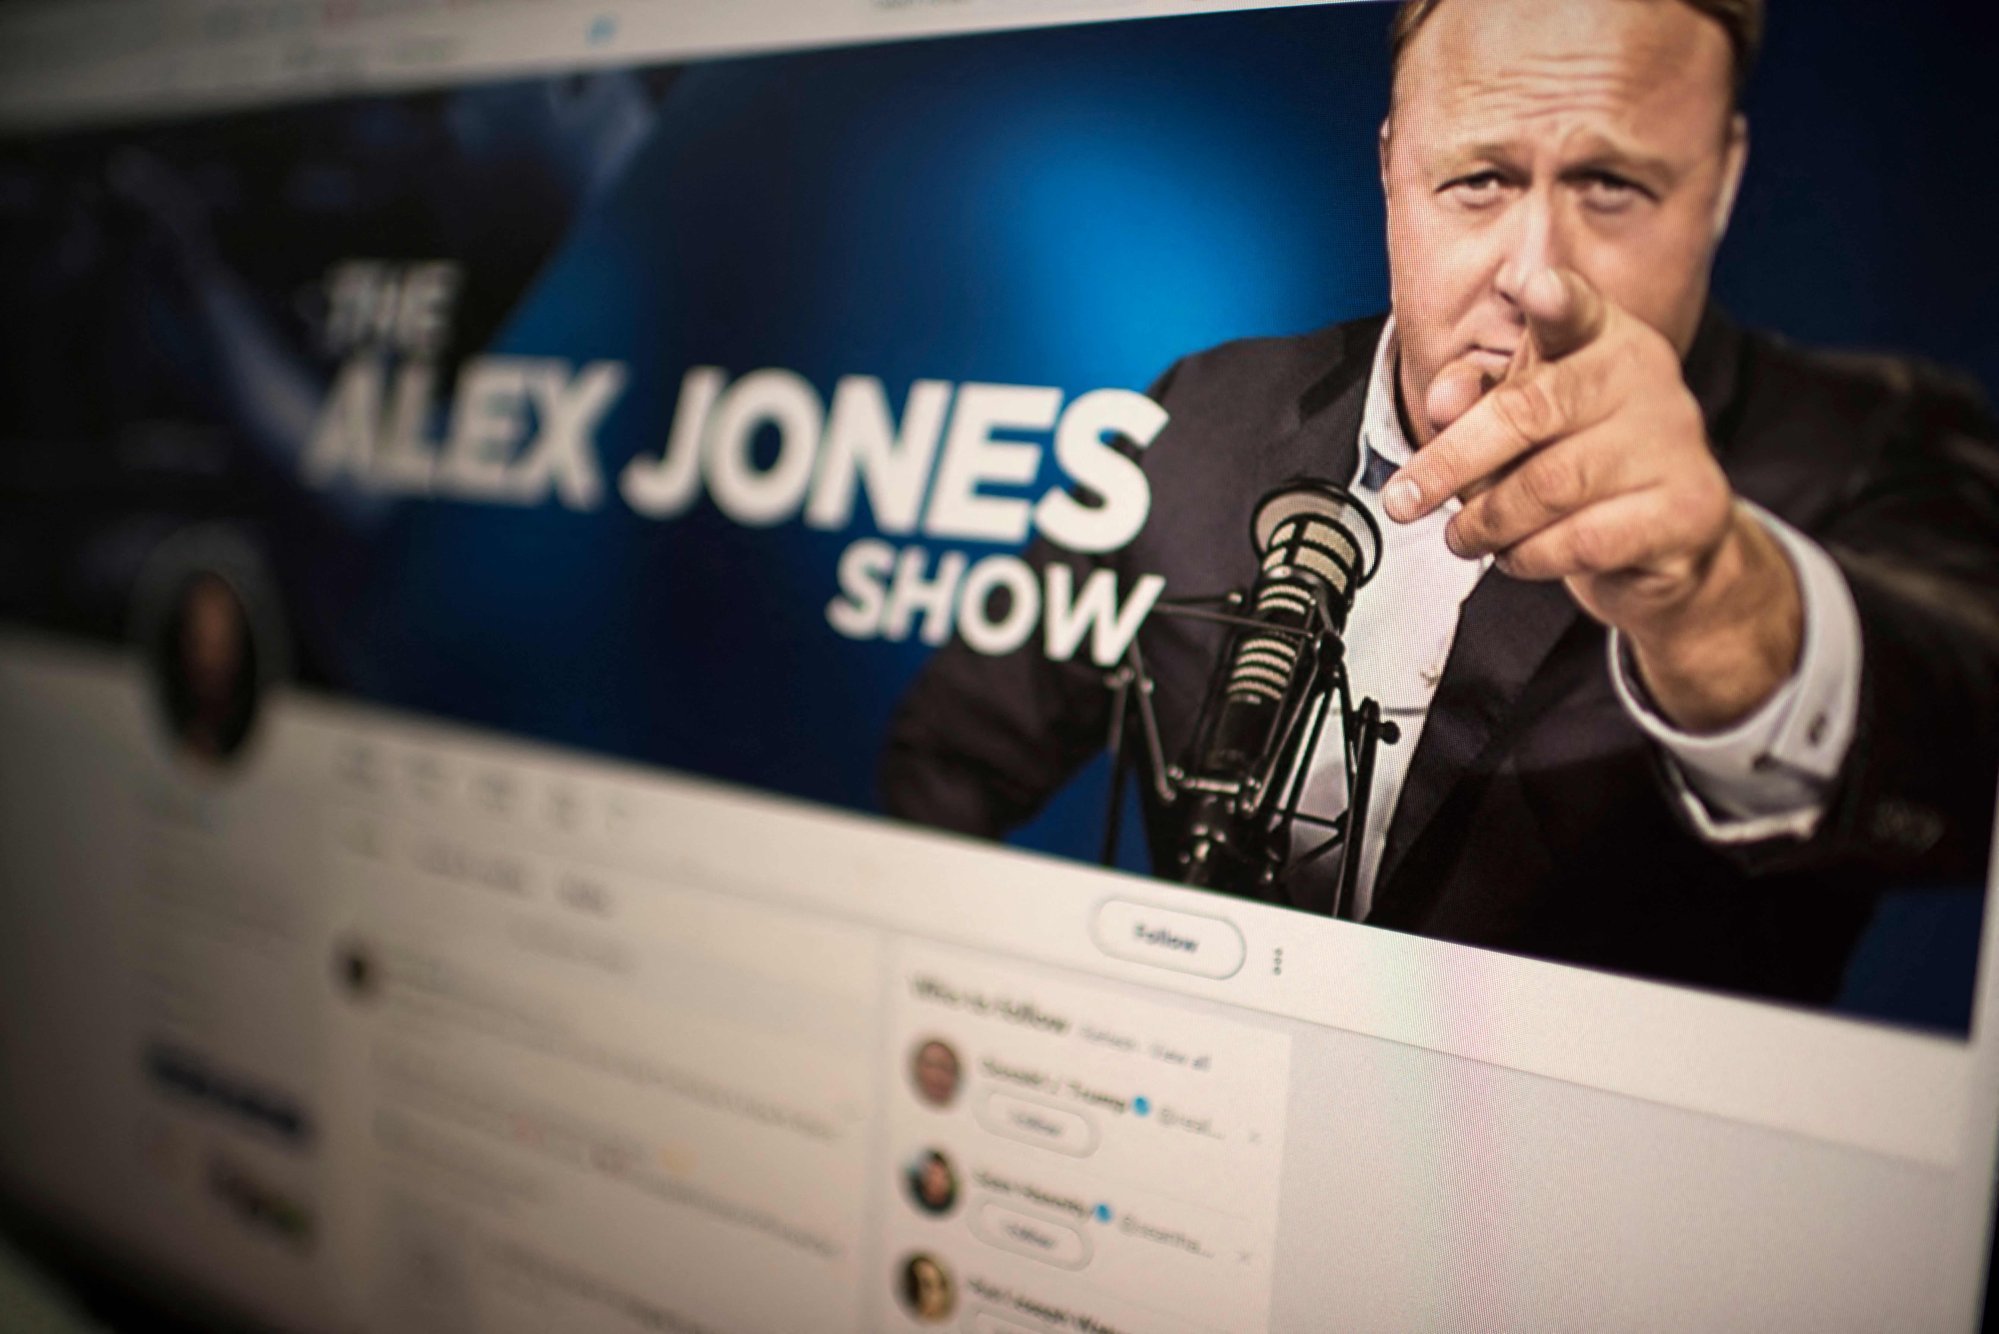 us jury orders alex jones to pay another us$45 million for sandy hook lies